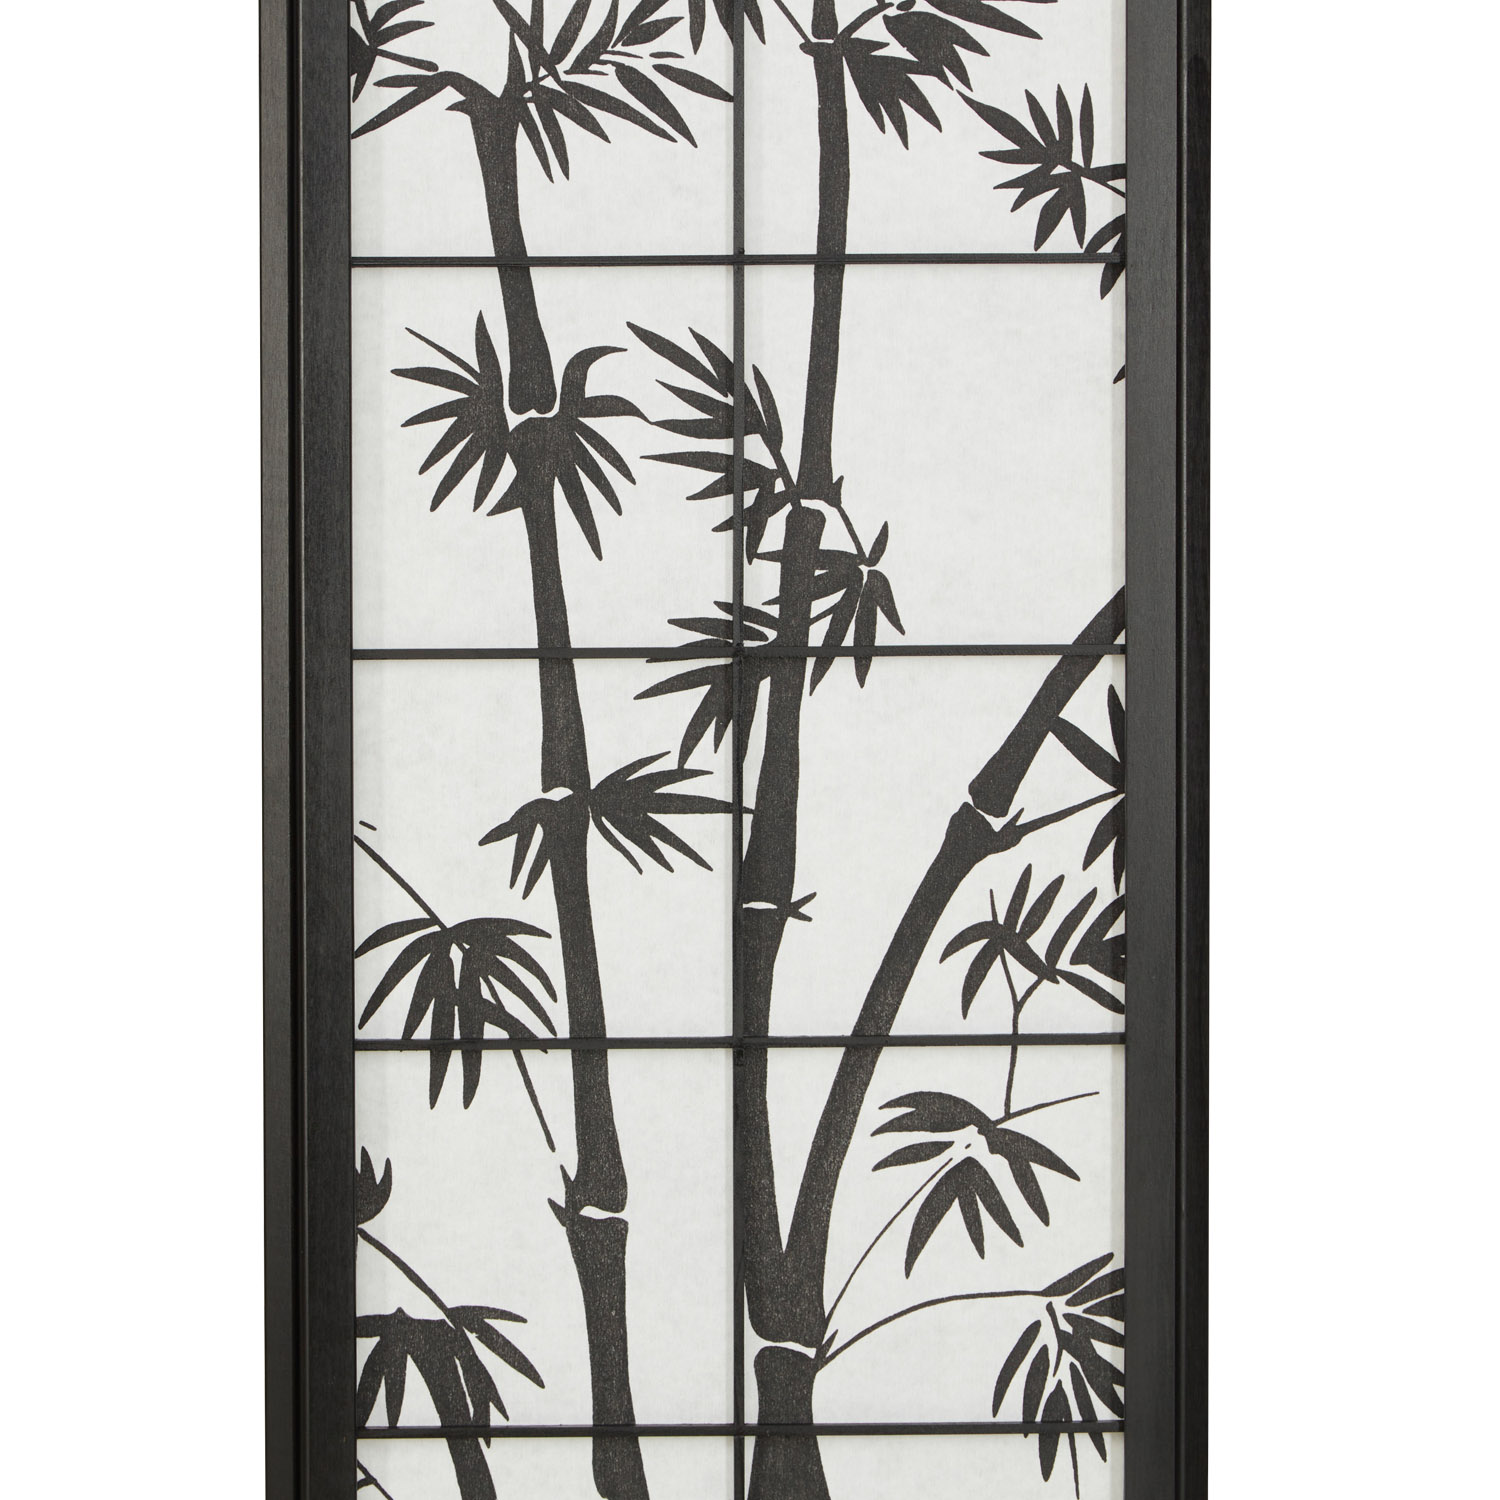 Paravent room divider 4 parts, wood black, rice paper white, bamboo pattern, height 179 cm	